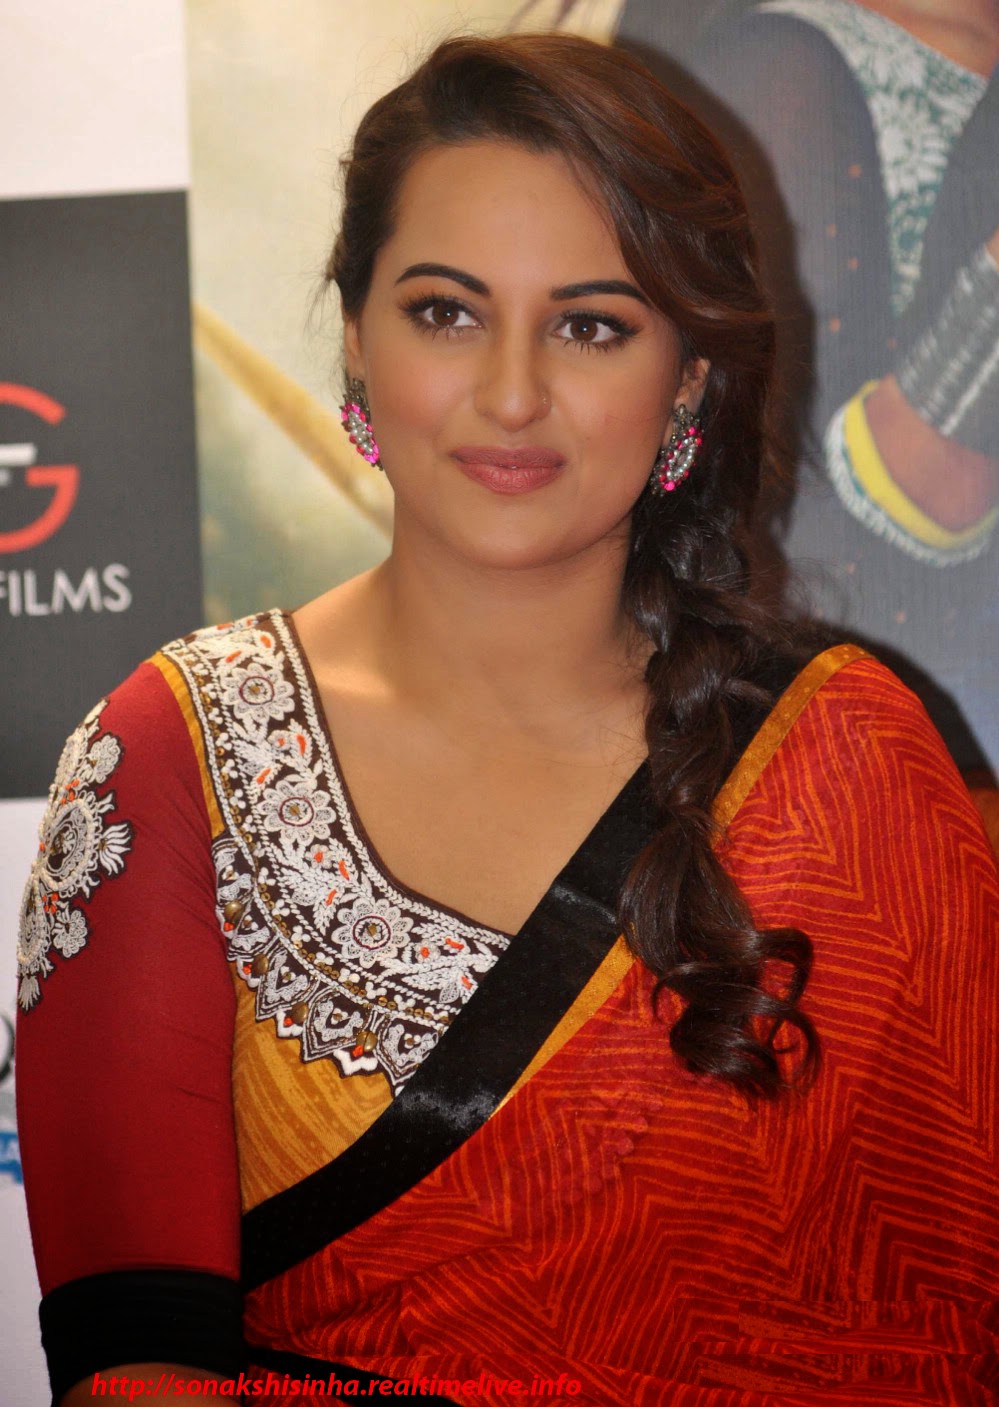 Sonakshi Sinha Hot Wallpapers, Images, Videos & Bikini Photos: Sonakshi  Sinha Pictures and Bikini Photos after Weight Loose